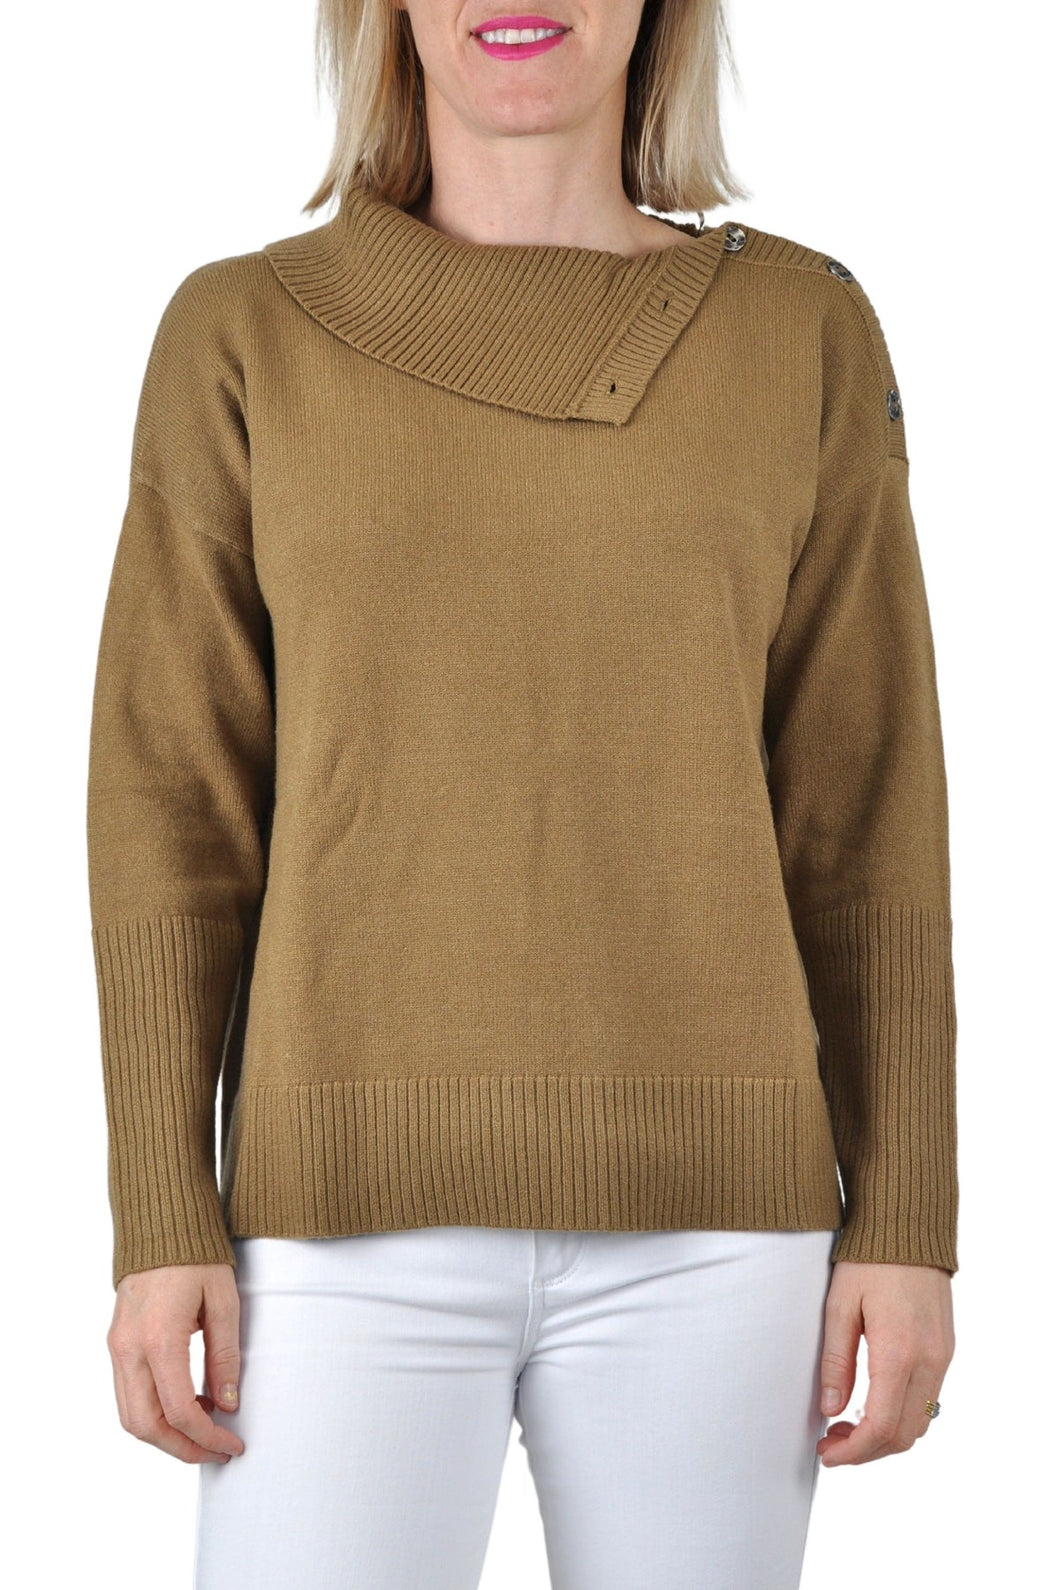 Foil Bright As A Button Turtle Neck Ribbed Knitted Jumper With Button Detail - Boutique on the Green